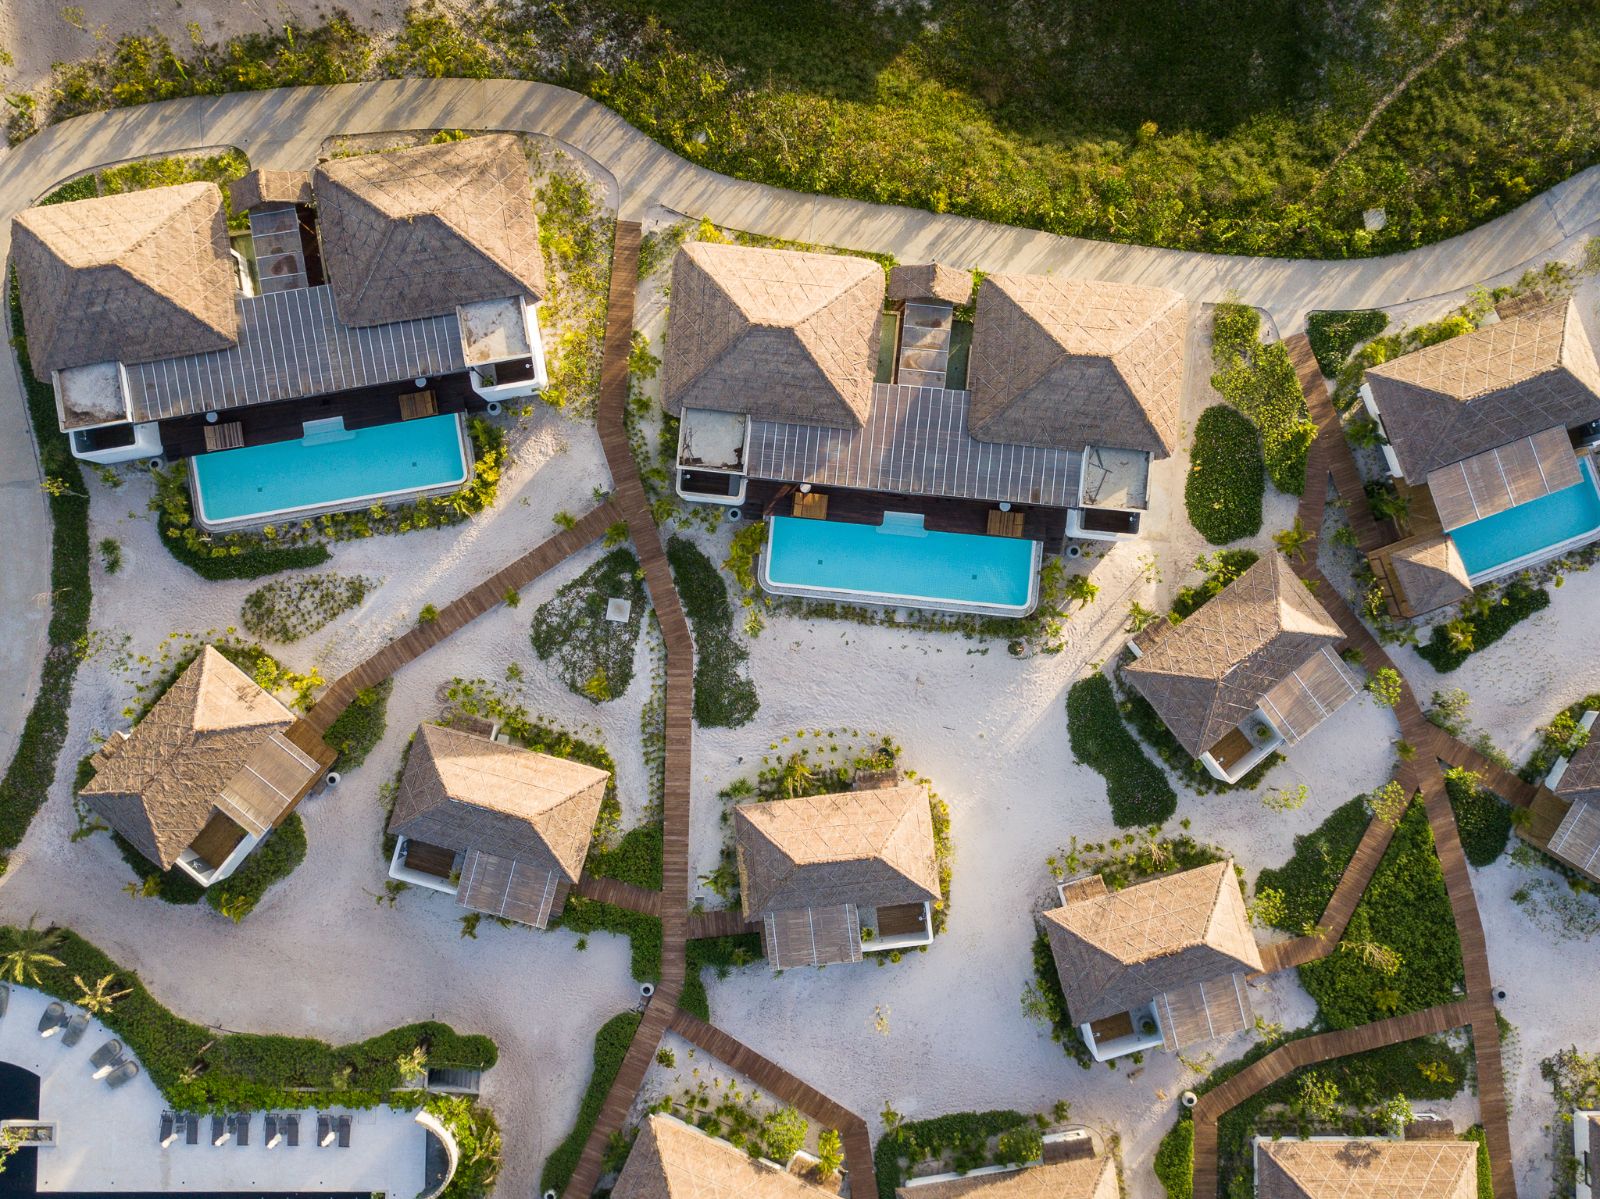 Birdseye aerial view of the Royal Sands Resort in Koh Rong, Cambodia